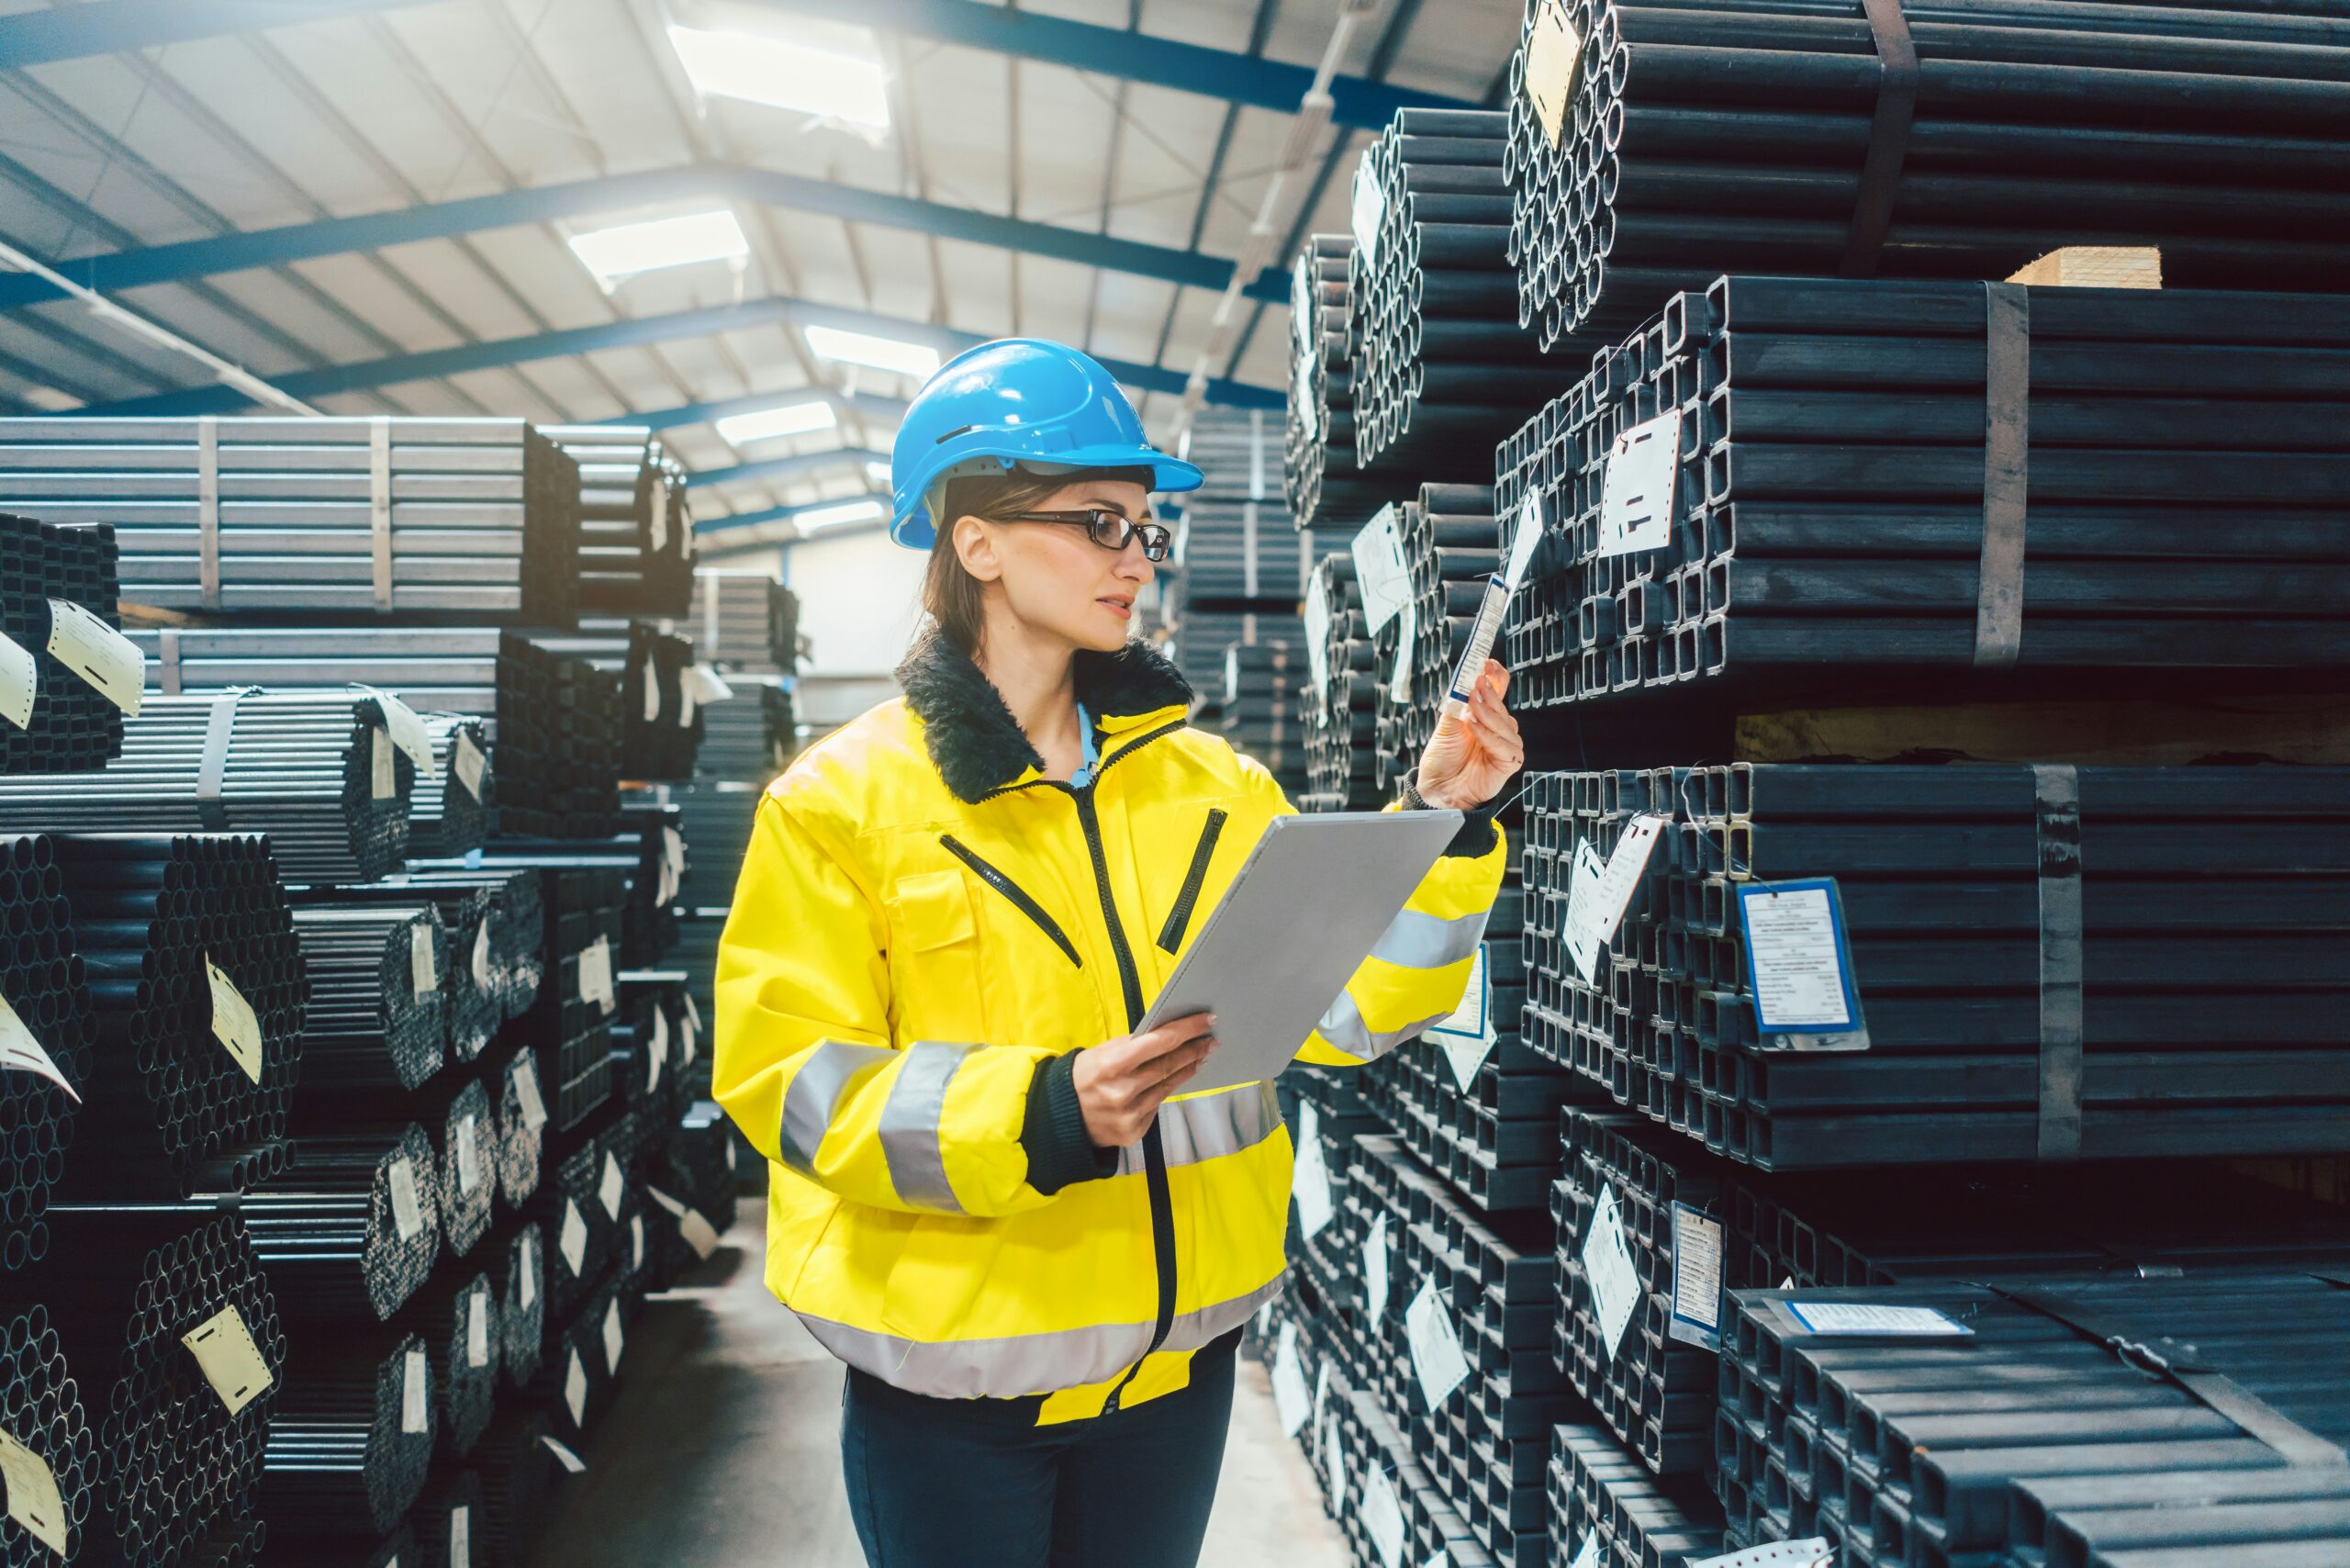 A worker in a high-visibility jacket and blue helmet holds a clipboard and inspects metal pipes stacked in rows inside a warehouse, showcasing the need for quality checks even as industries explore what are examples of process automation.